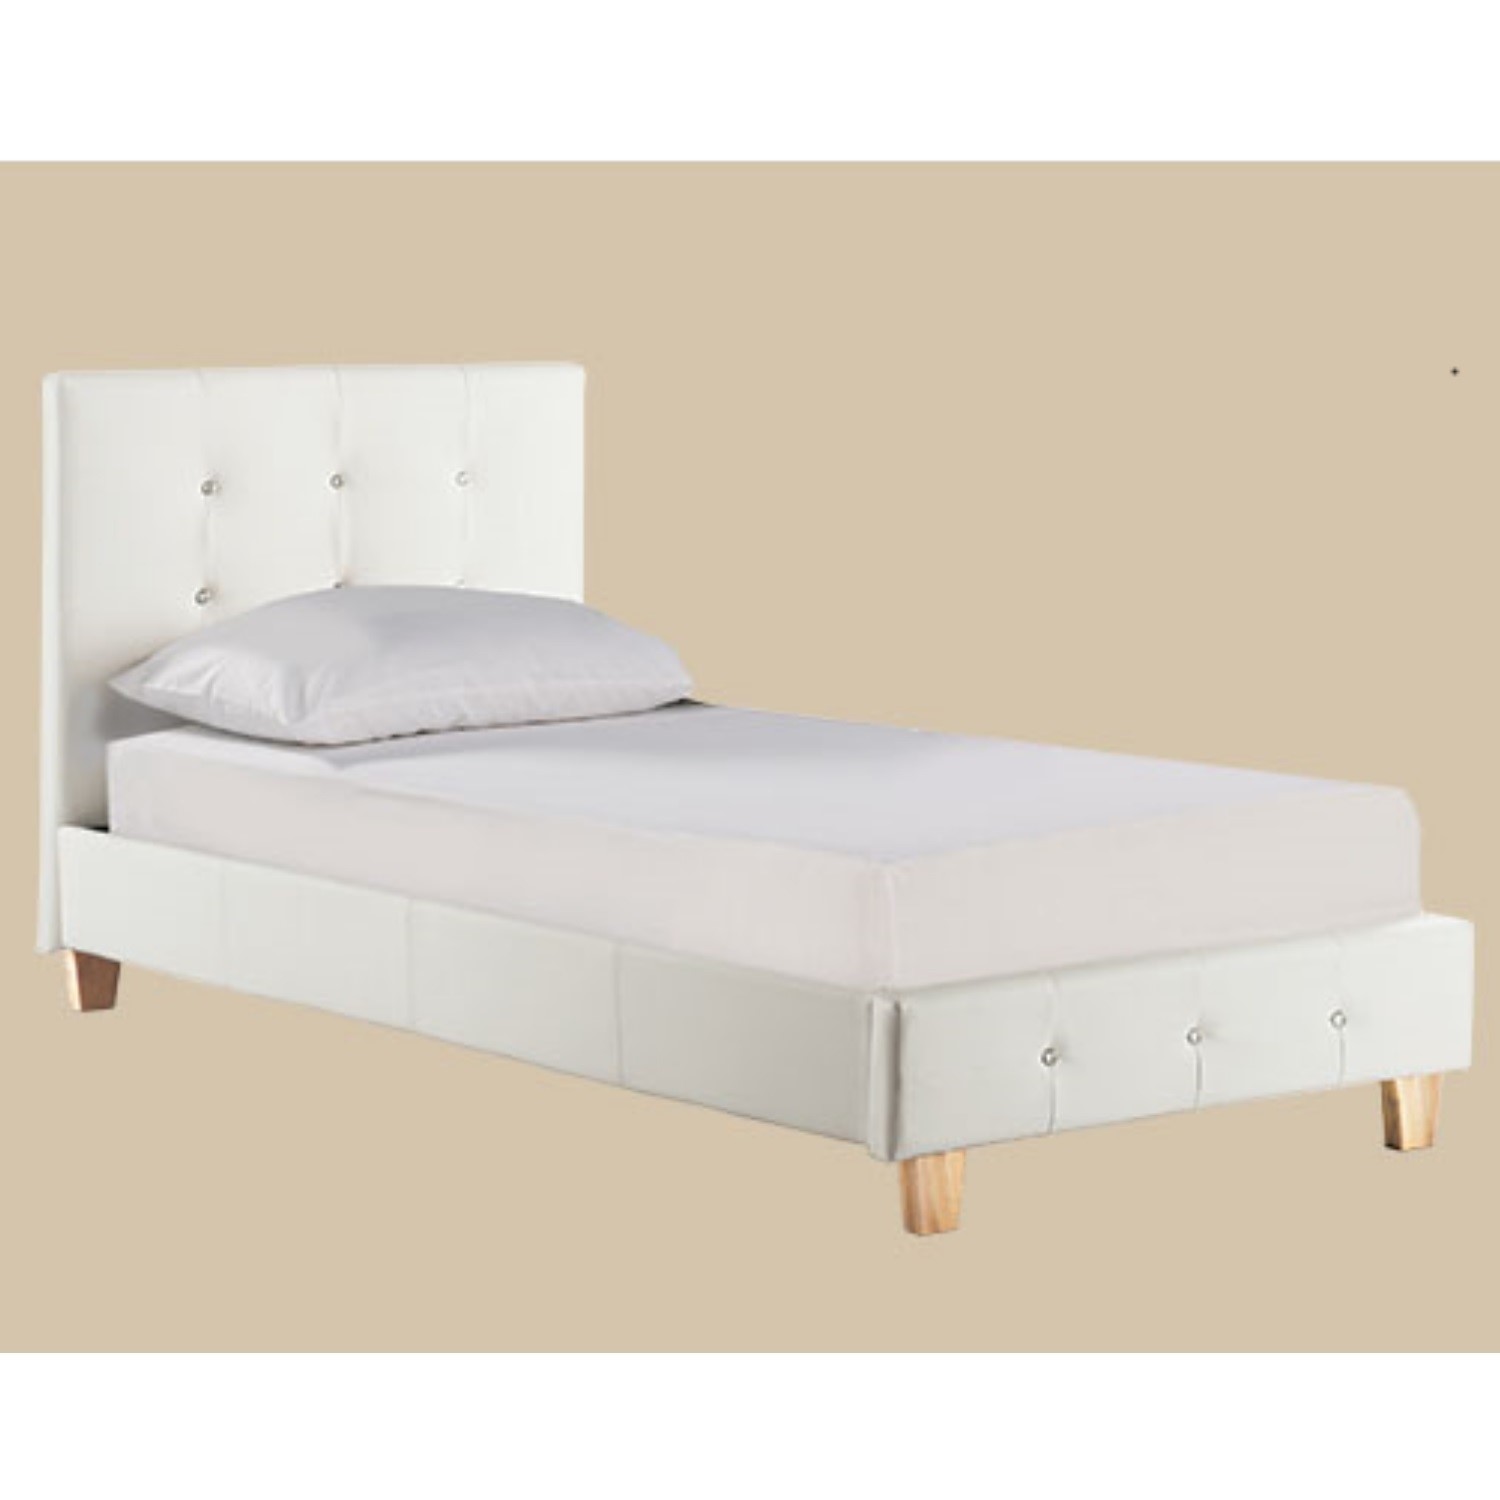 Lpd Diamante Single Bed In White, White Leather Single Bed Frame